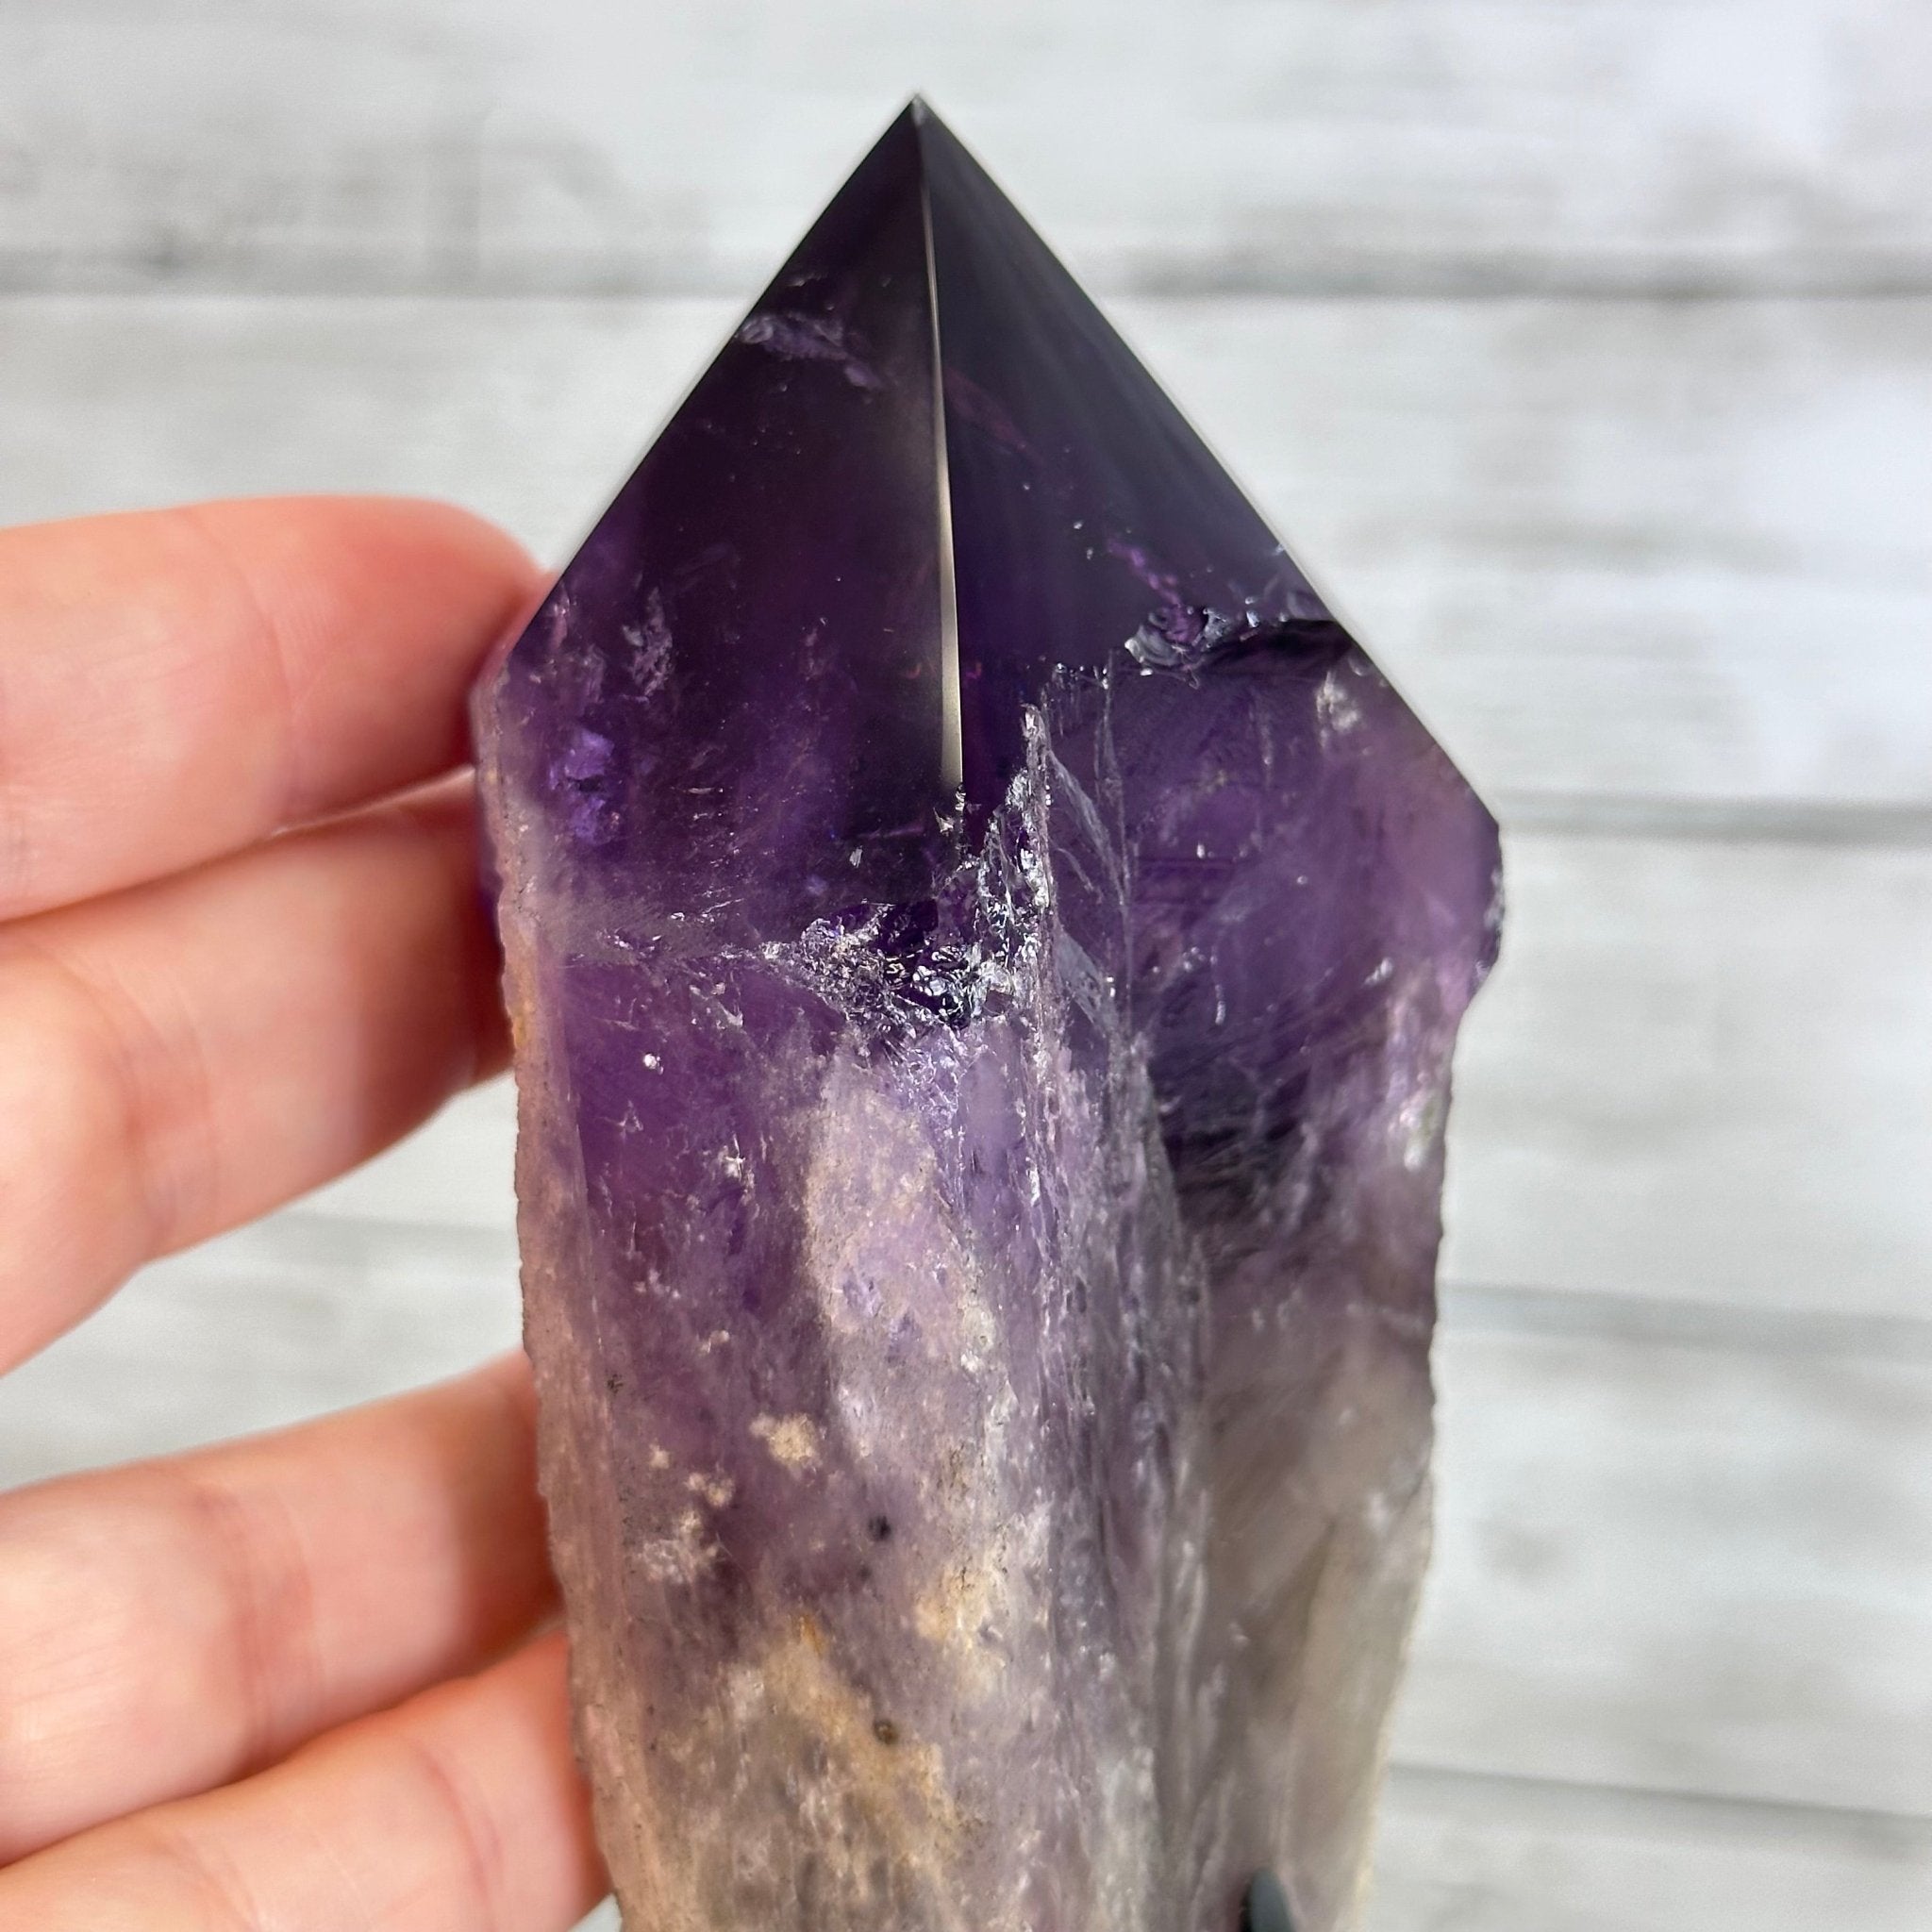 Super Quality Amethyst Wand on a Metal Stand, 2.1 lbs & 10.6" Tall #3123AM-010 - Brazil GemsBrazil GemsSuper Quality Amethyst Wand on a Metal Stand, 2.1 lbs & 10.6" Tall #3123AM-010Clusters on Fixed Bases3123AM-010